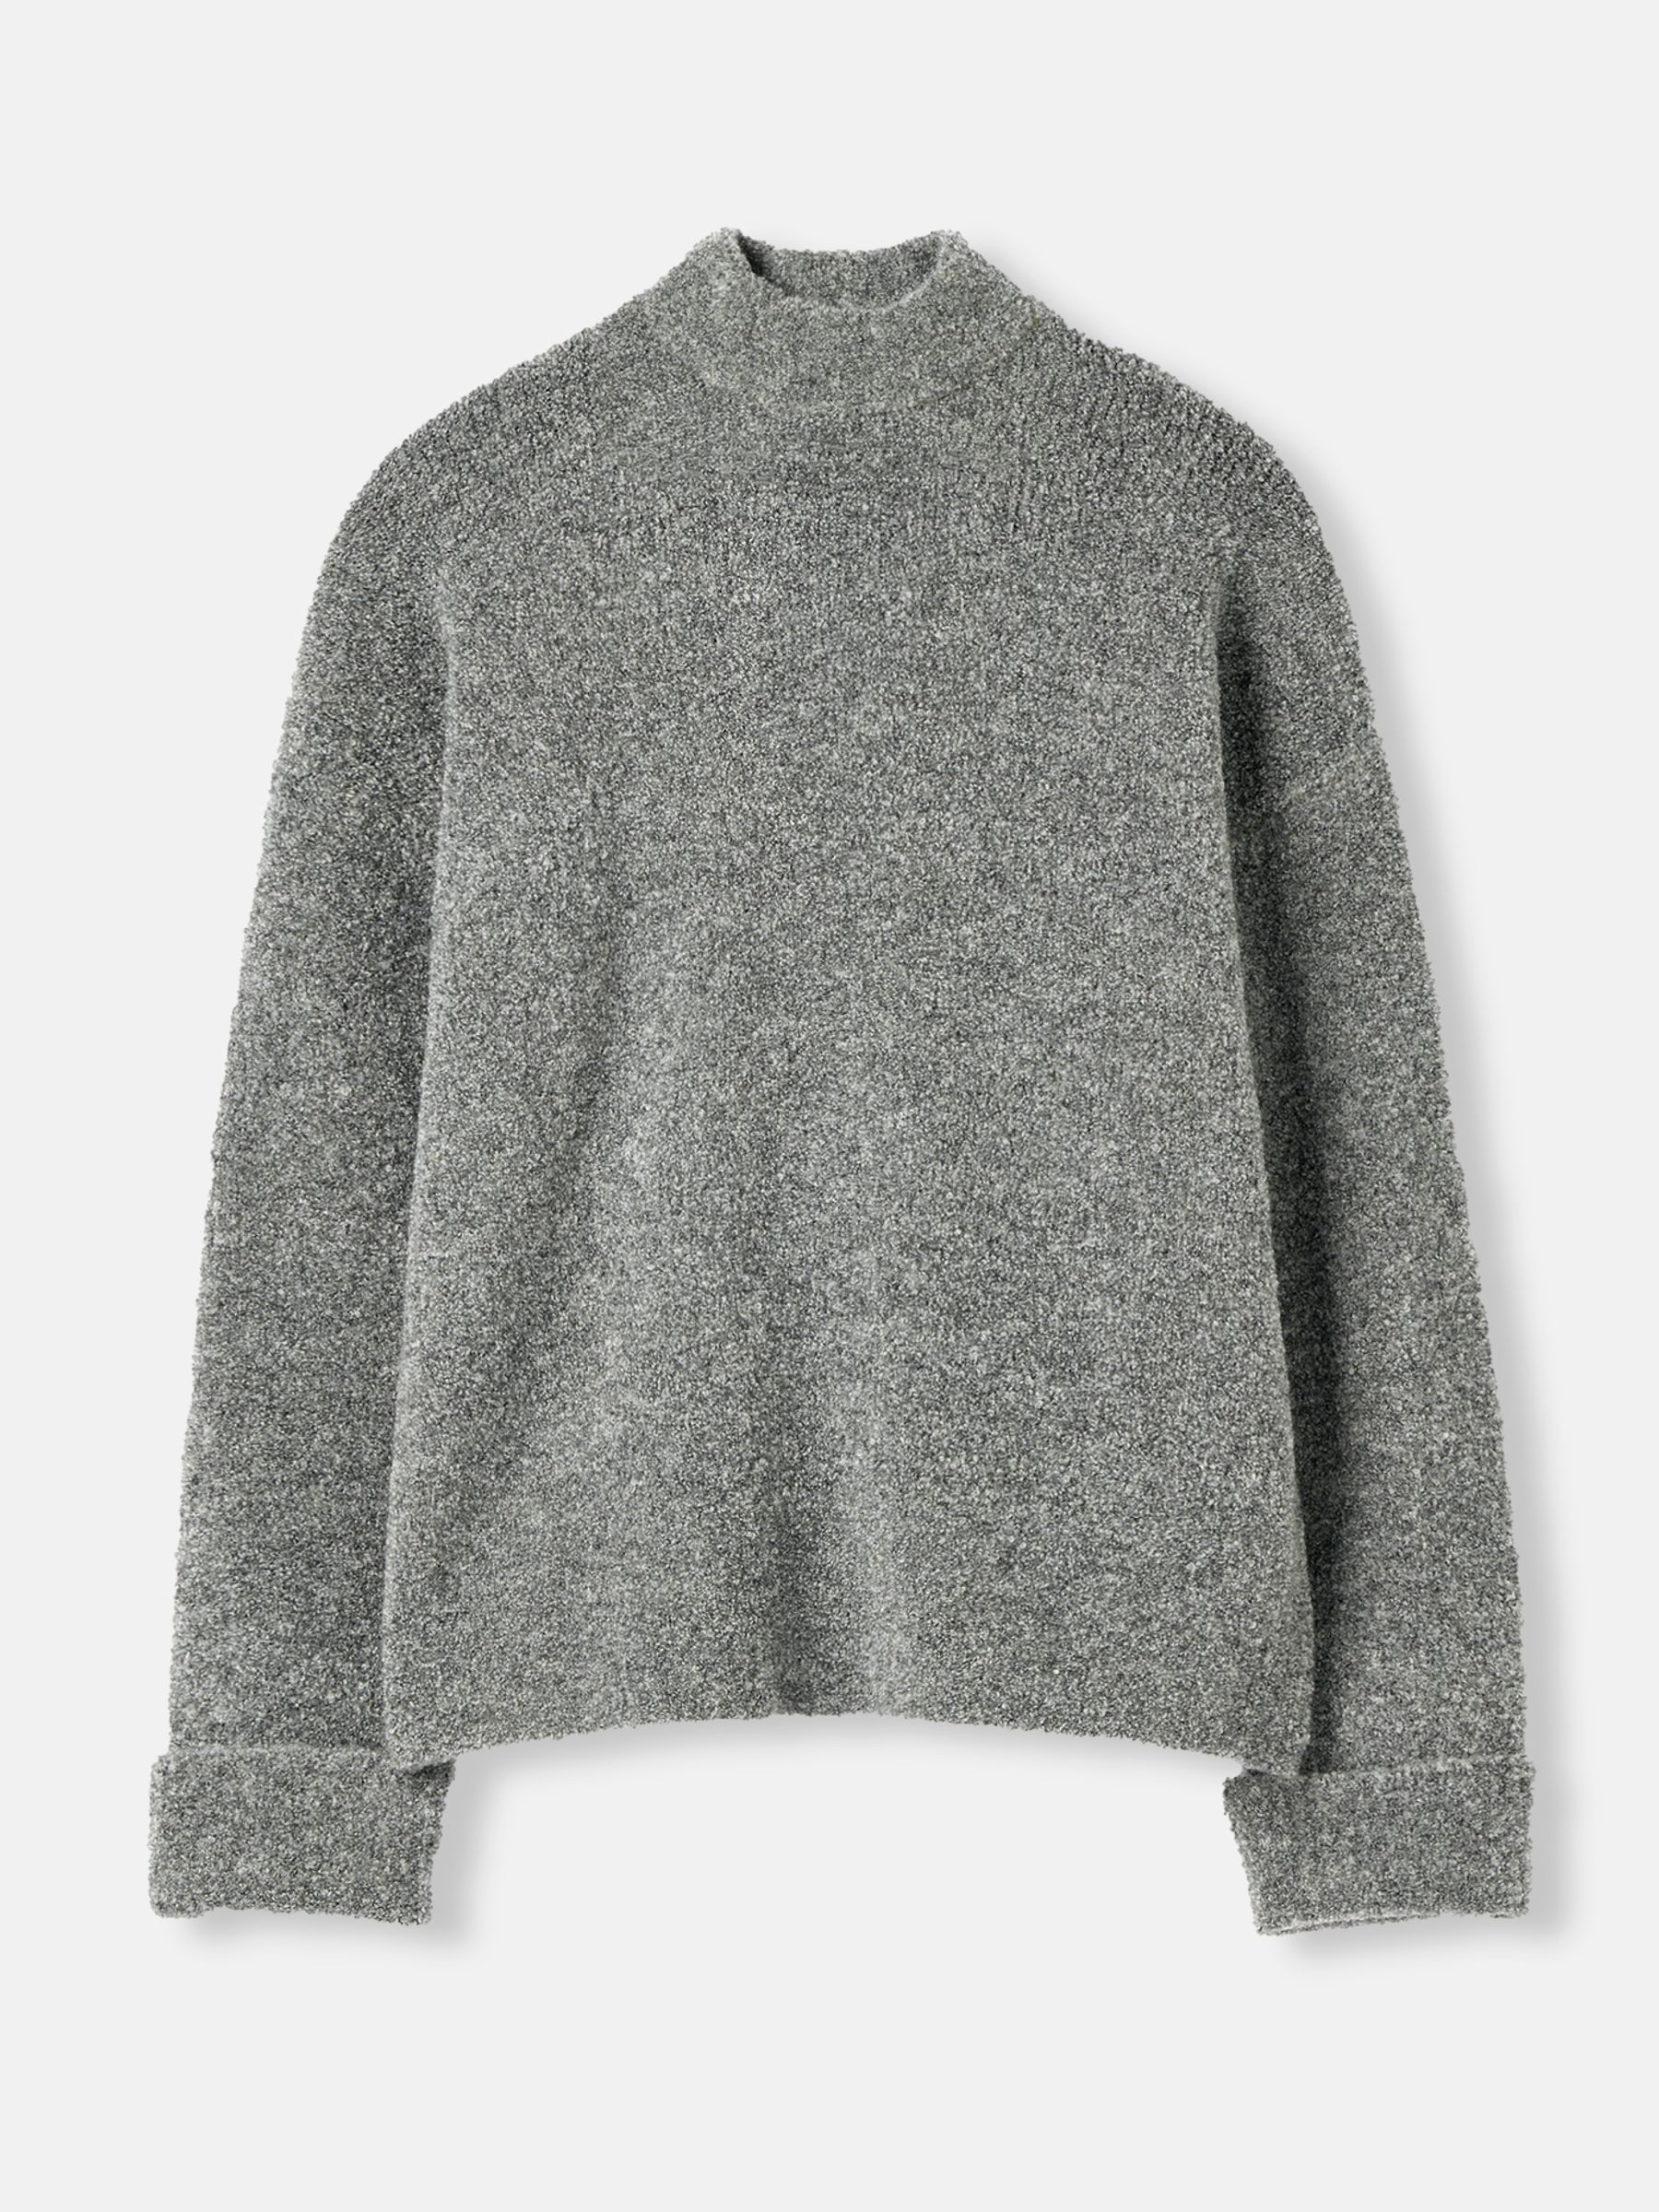 Buy Bea Grey High Neck Bouclé Jumper from the Joules online shop